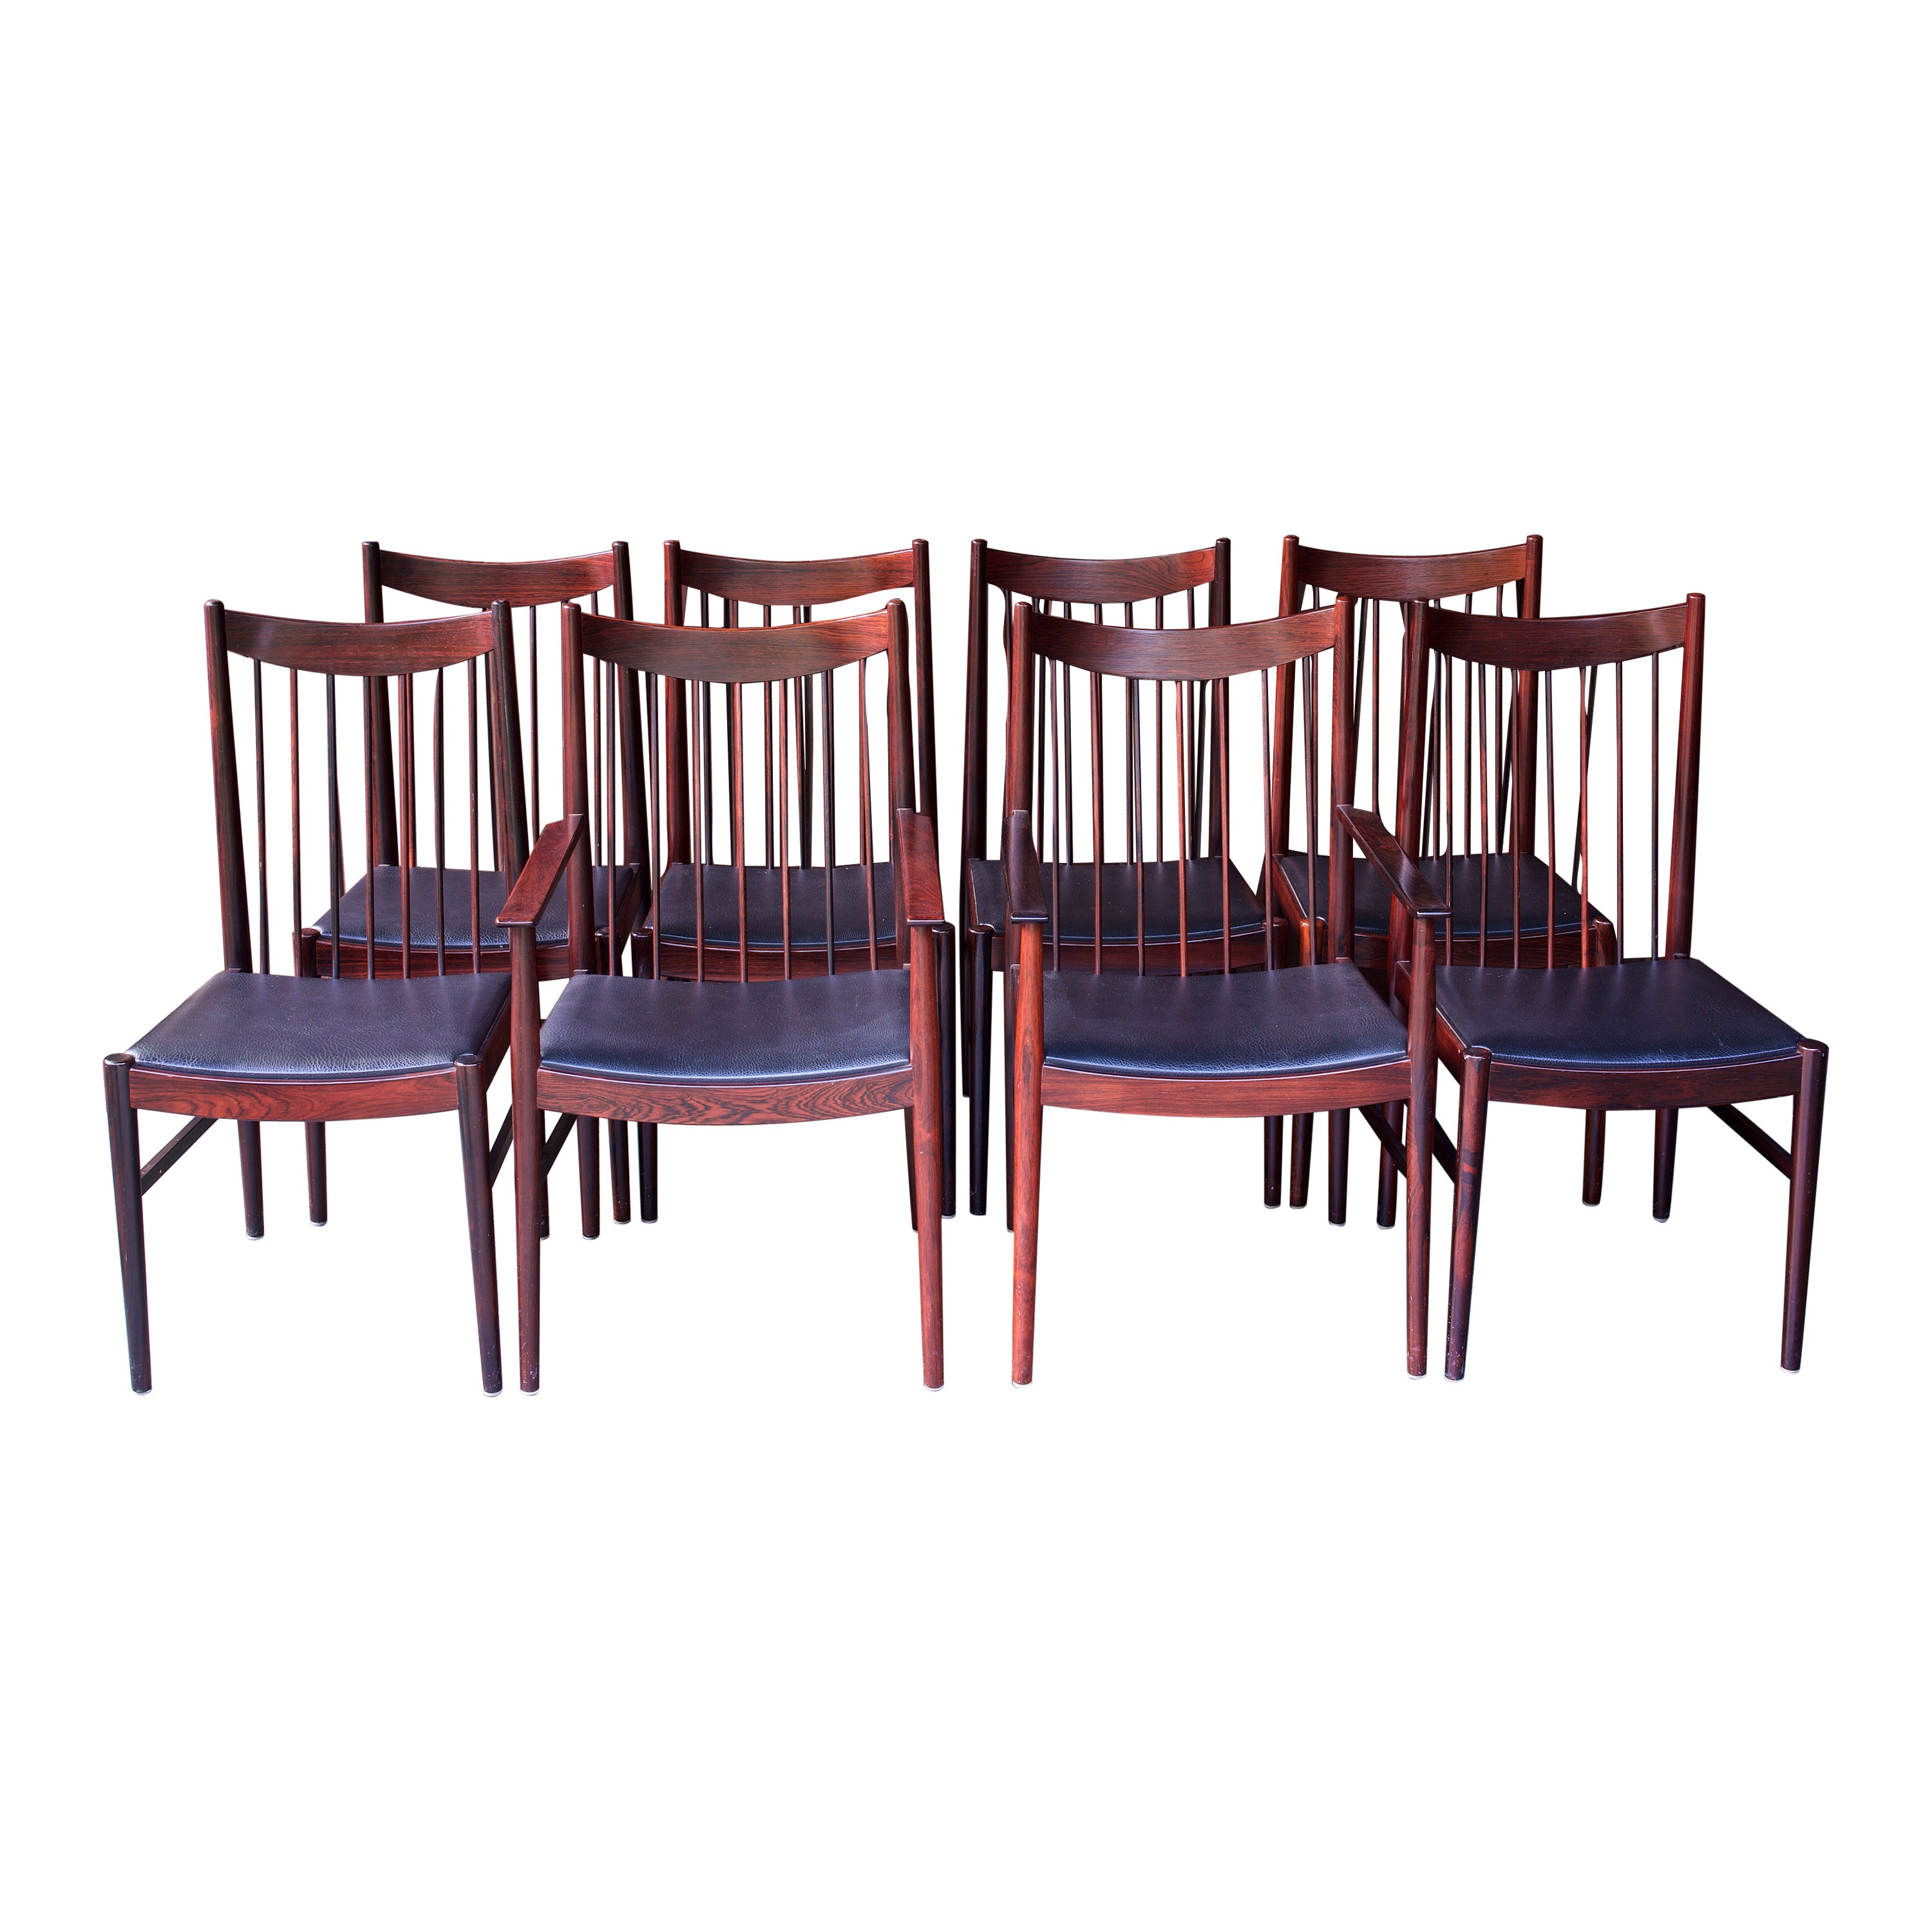 8 Brazilian Rosewood Spindle High-Back Dining Chairs Danish Sibast Model No. 422 For Sale